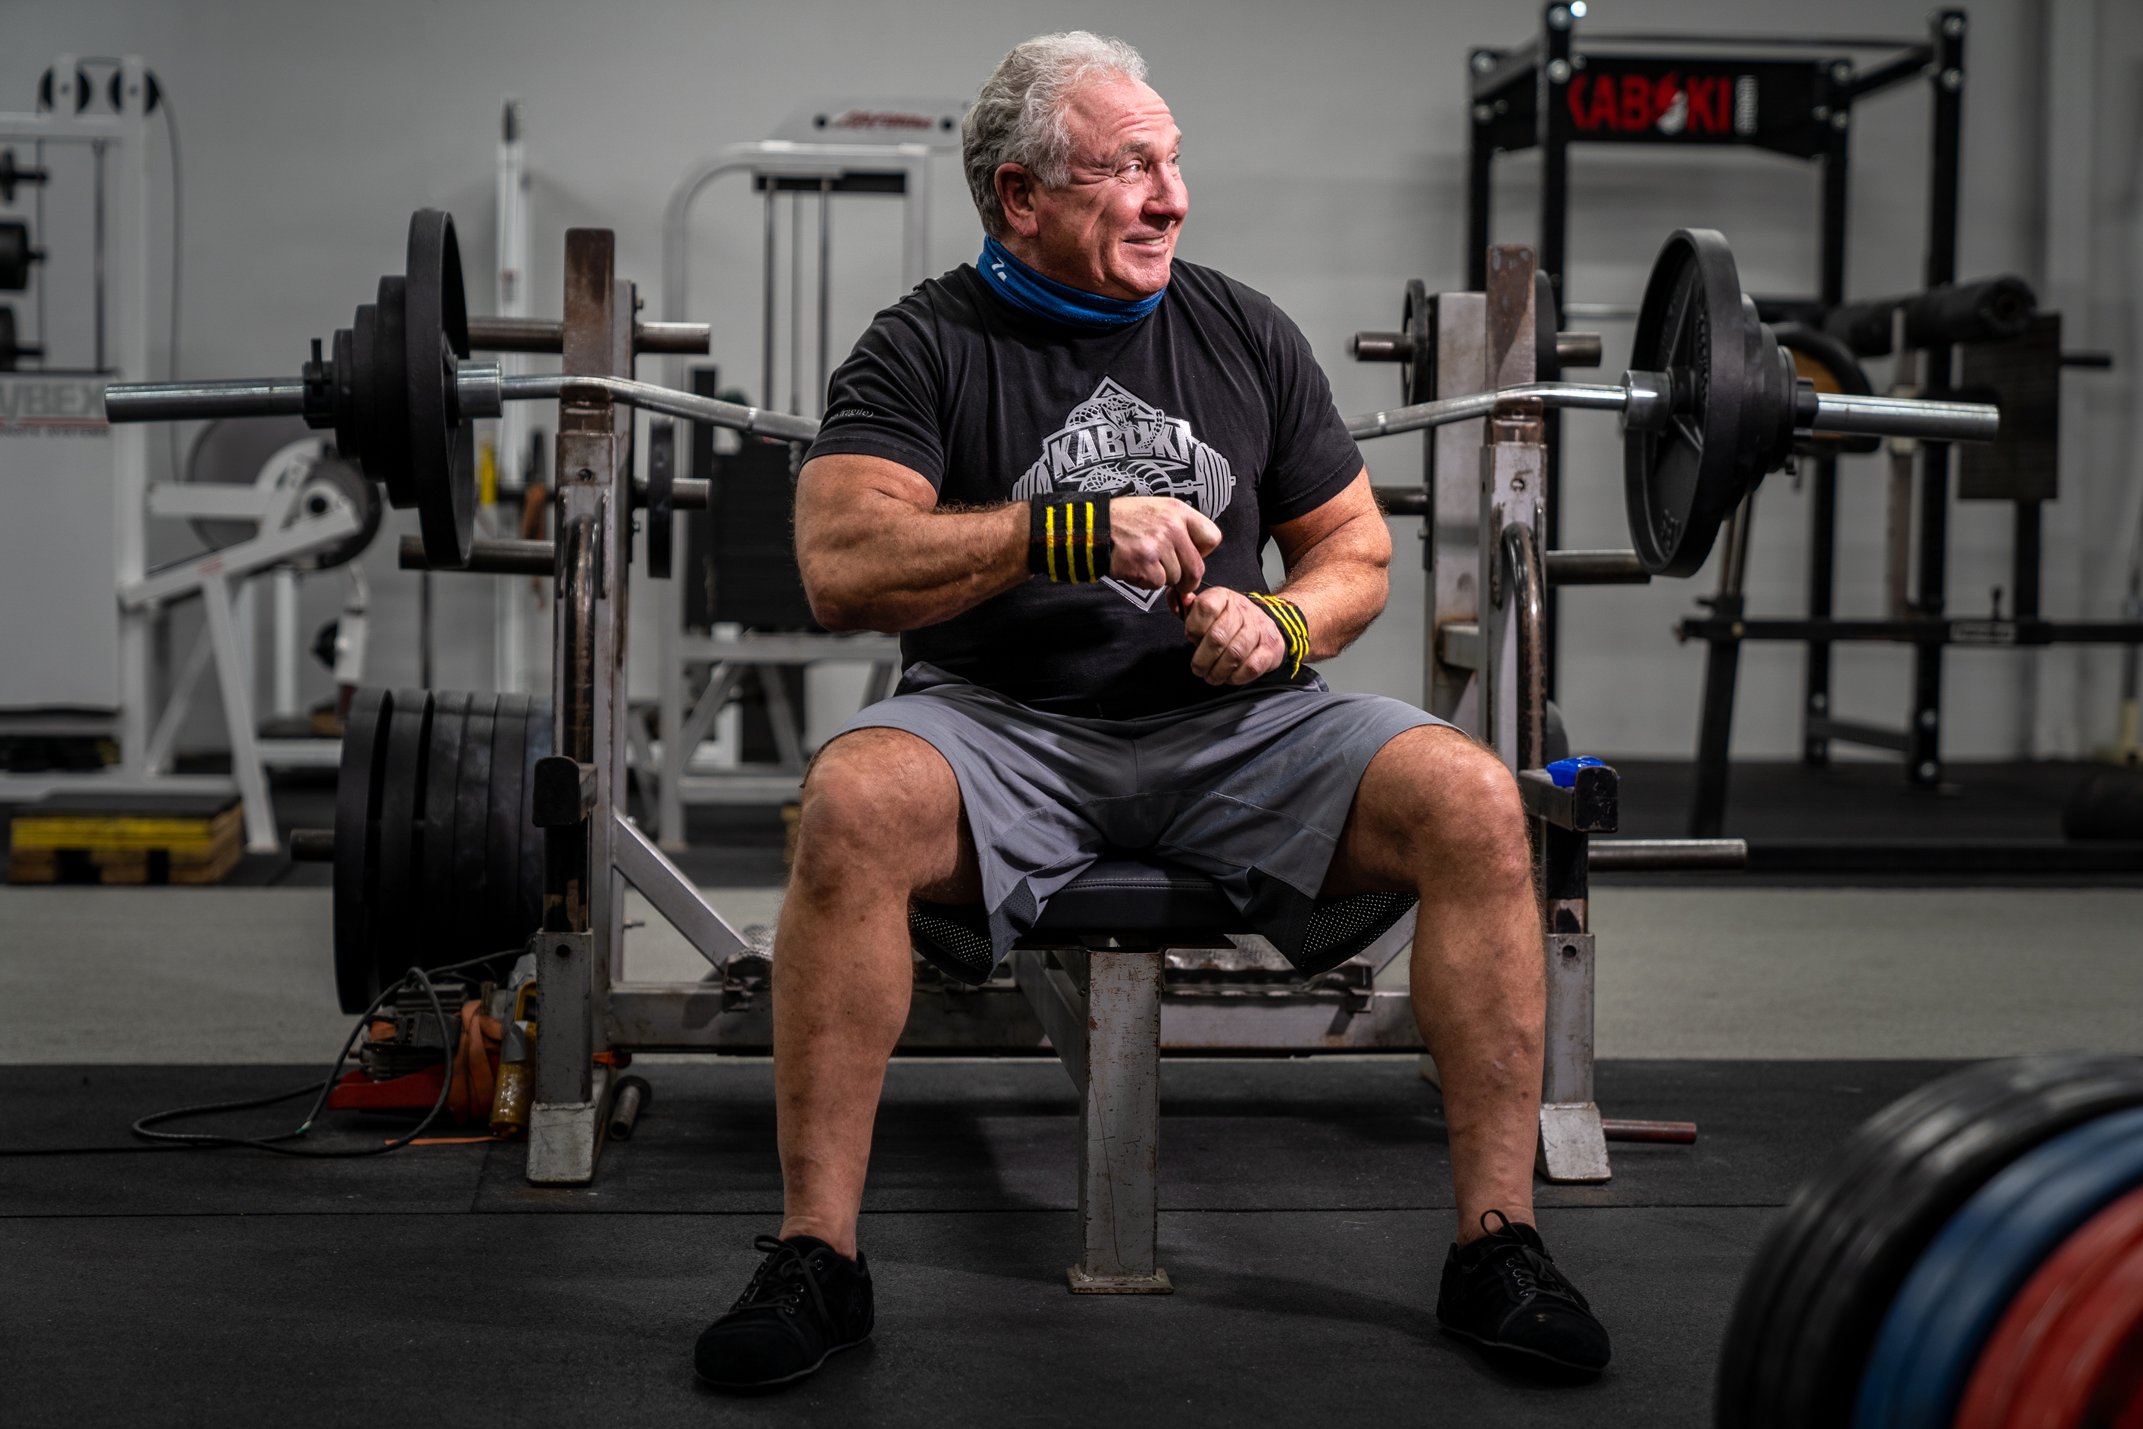 Rudy Kadlub smiles while seated on a weightlifting bench. He wears a Kabuki Strength shirt, exercise bands around his wrists, and a gaiter.